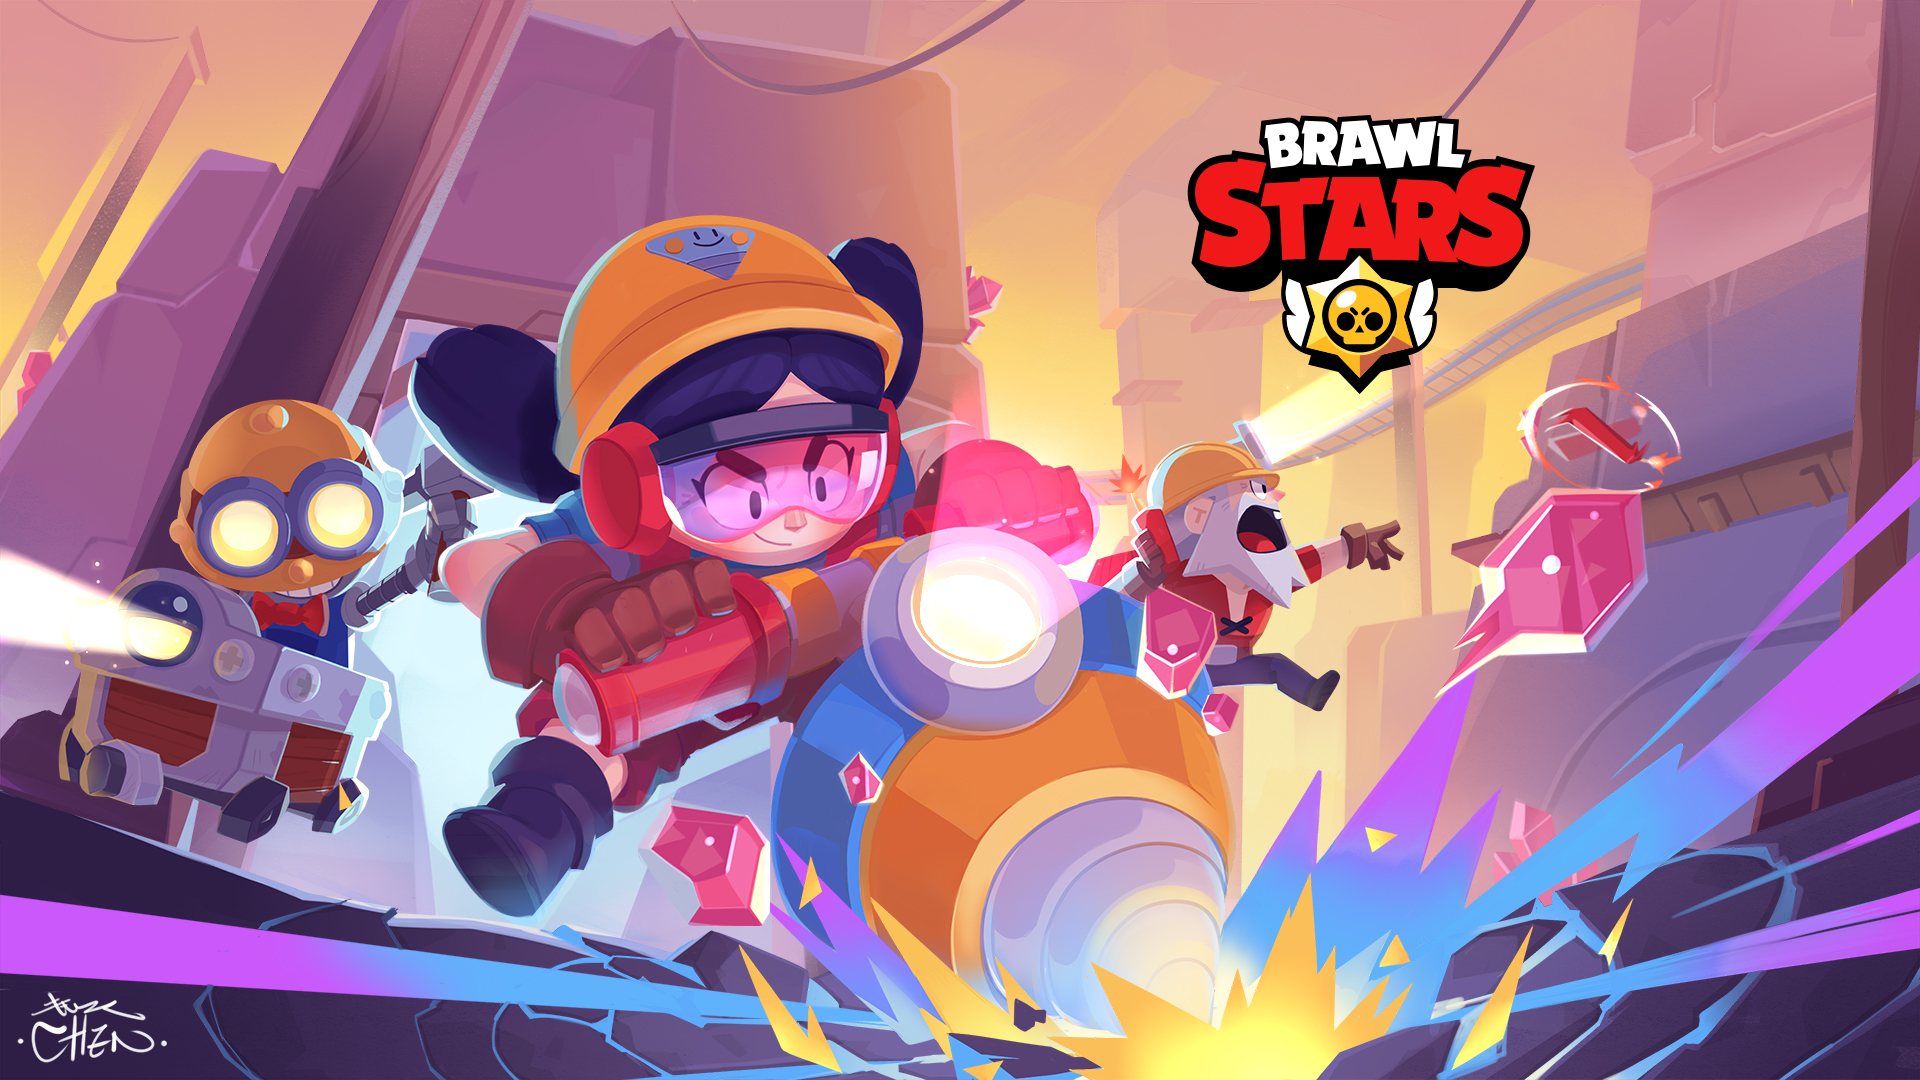 Brawl Stars On Twitter Here Are Some Wallpapers Of Your Favorite Miners - wallpapers de brawl stars 2021